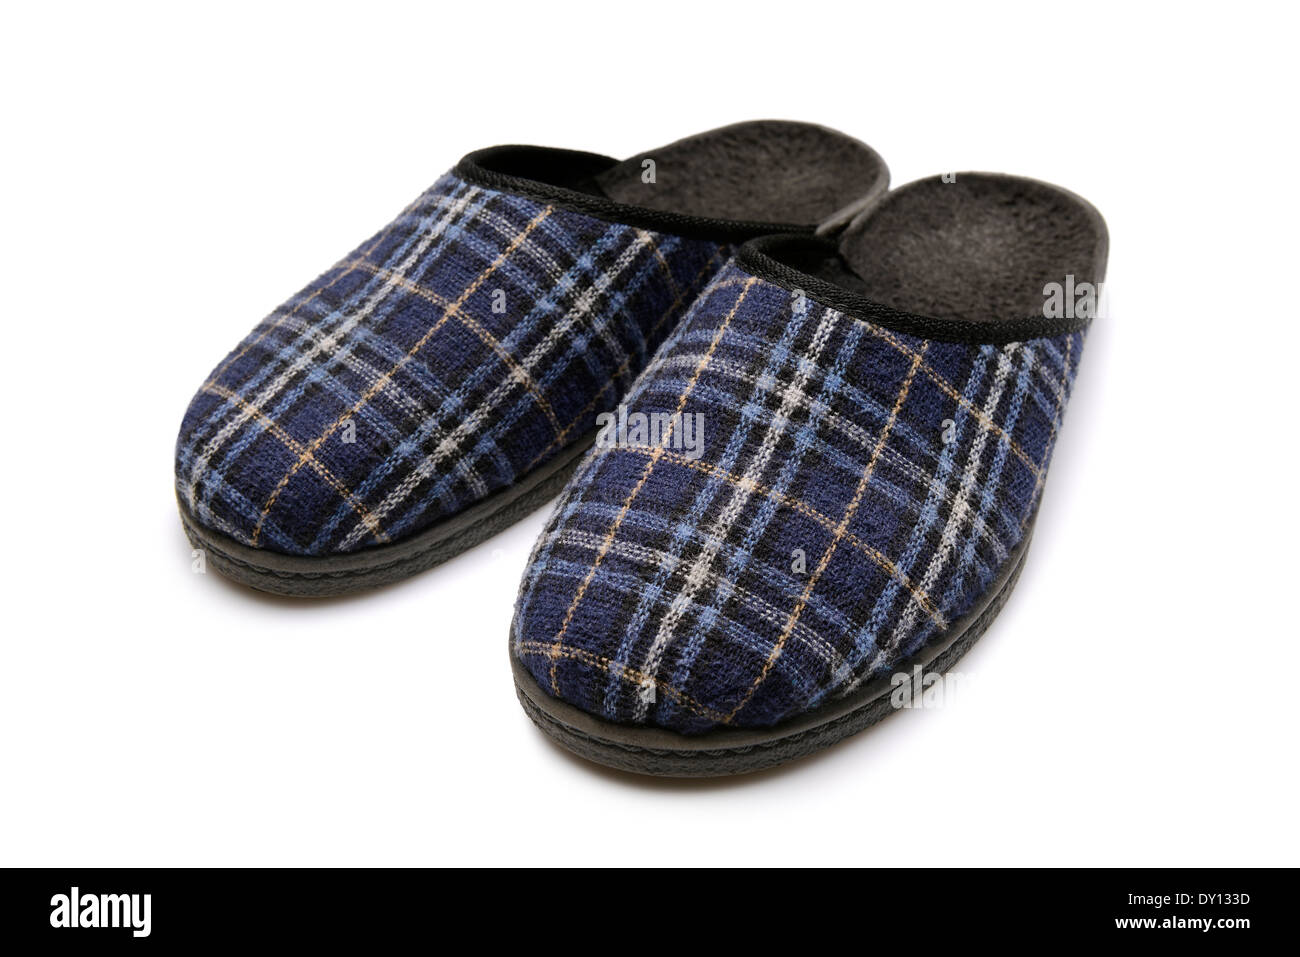 Pair of Slippers, Cut Out. Stock Photo